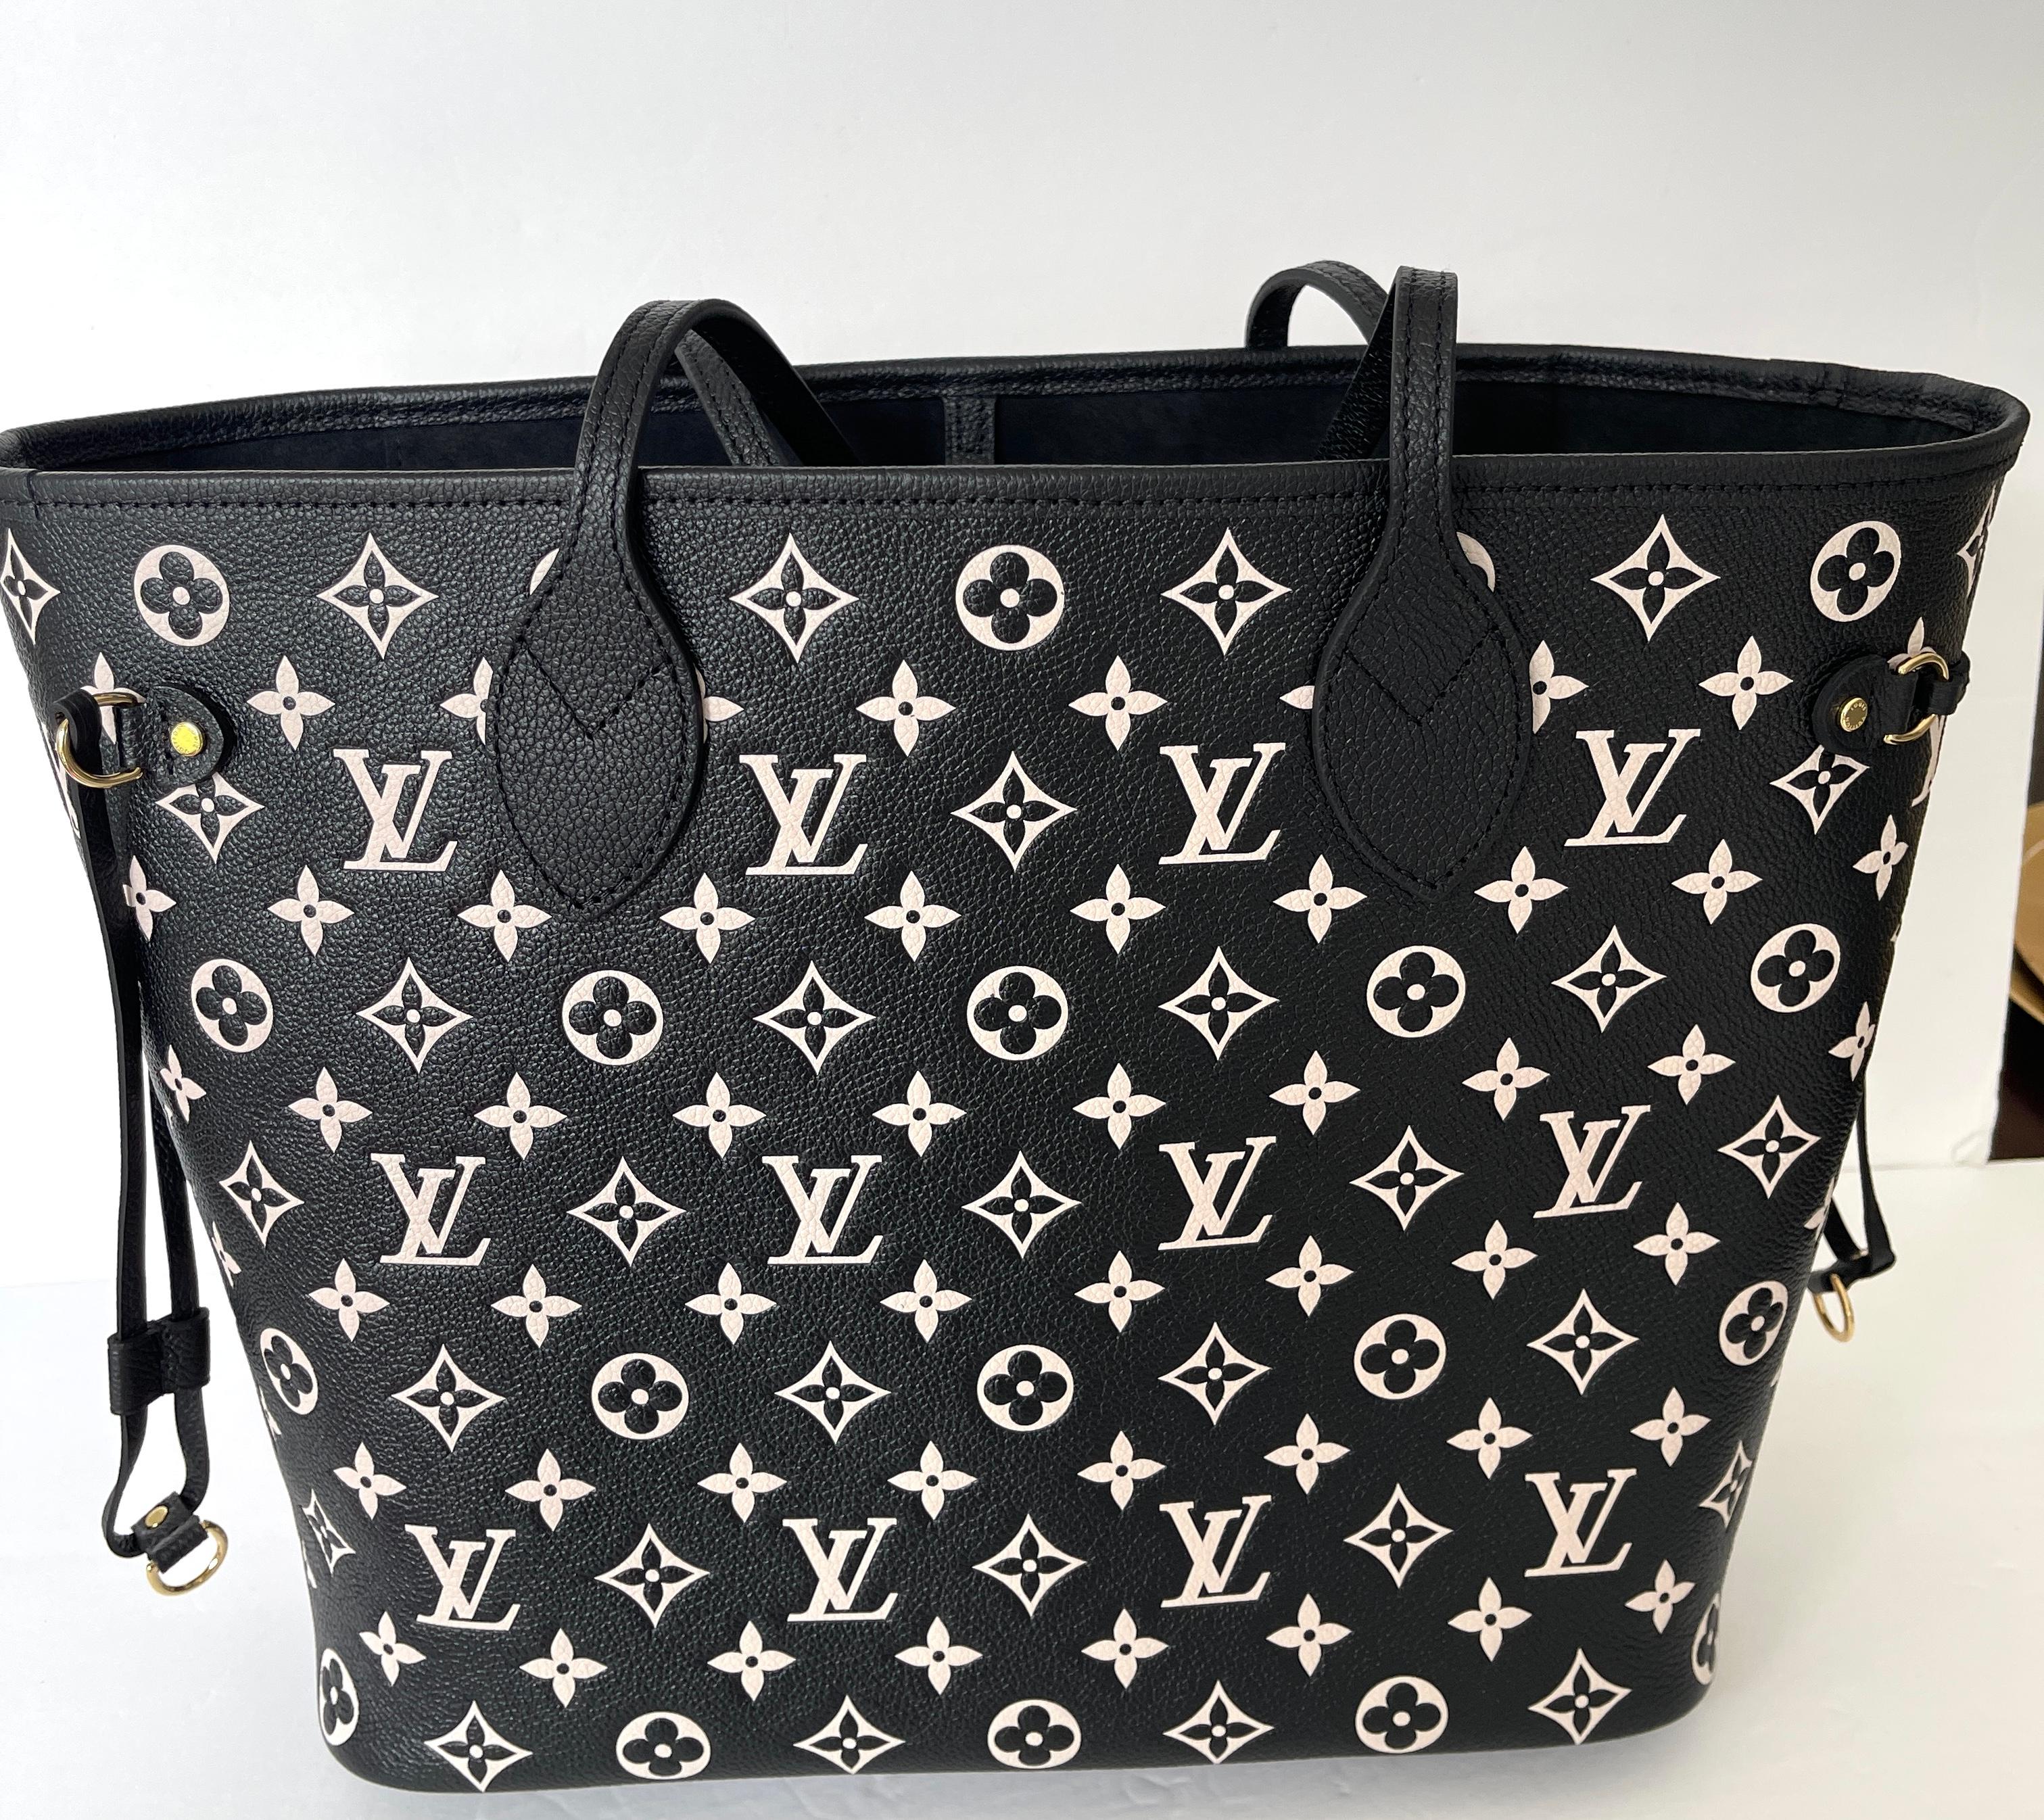 Louis Vuitton Neverfull
SOLDOUT AT LV
Done in Empriente Leather, unlike the canvas editions
Empriente  Monogram Neverfull
A must for the avid collector
The Neverfull MM Size
Black White and Pink Pouch
Style number M46103
12.2 x 11 x 5.5